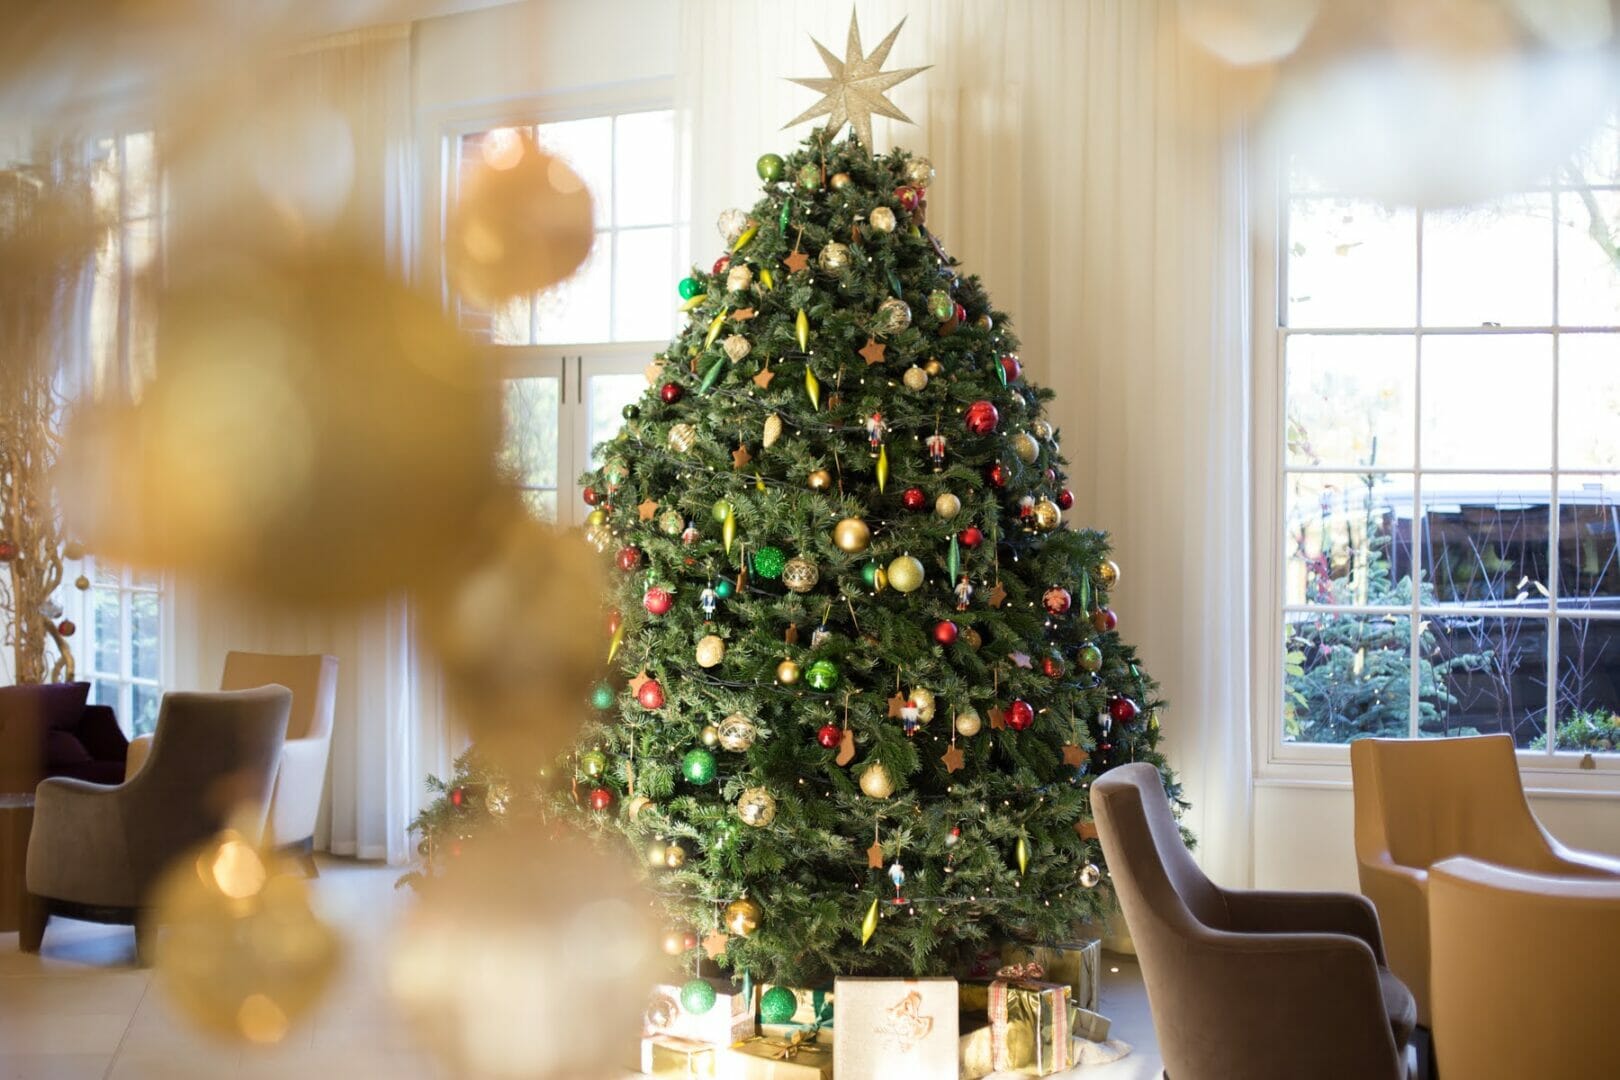 Celebrate the Festive Season in Style at The Grove, Hertfordshire this Christmas and New Year